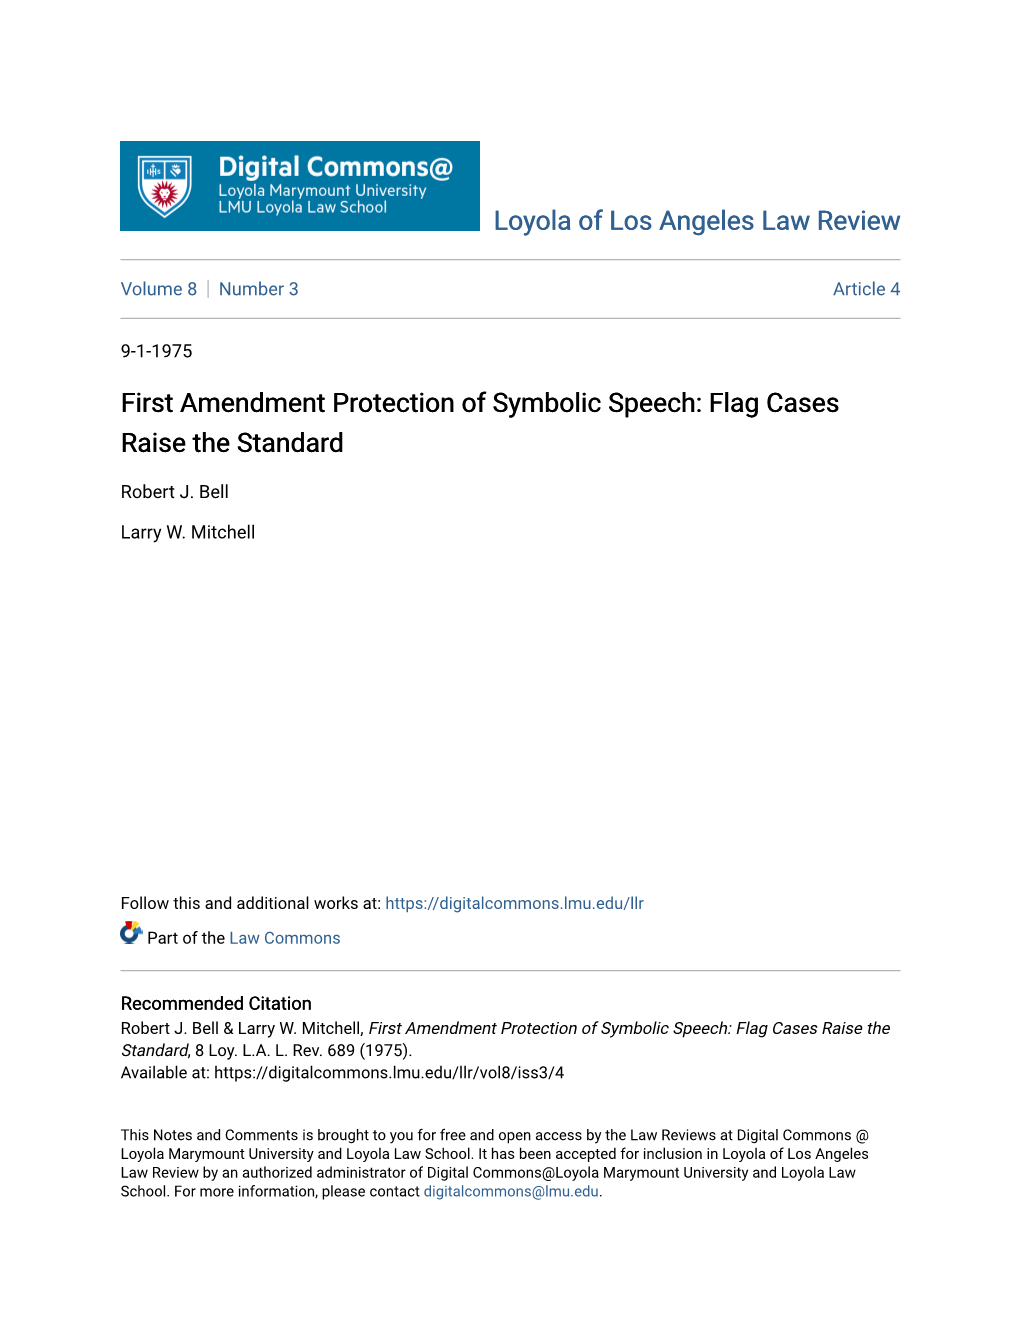 First Amendment Protection of Symbolic Speech: Flag Cases Raise the Standard